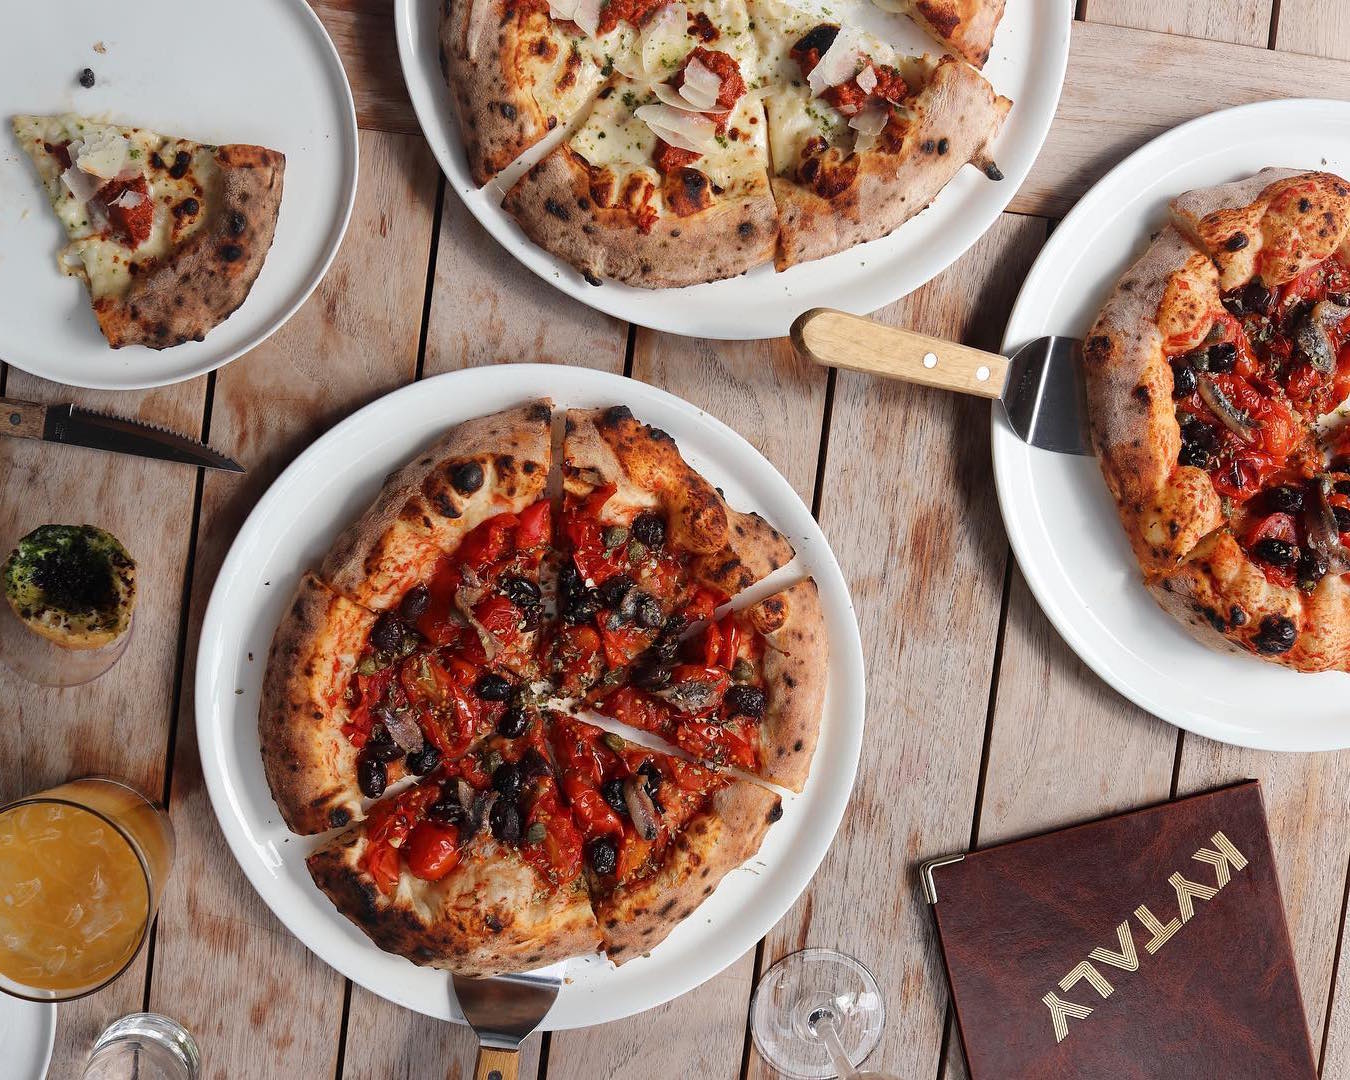 Insta Eats: Hong Kong foodies chow down on pizza, pancakes and uni pasta